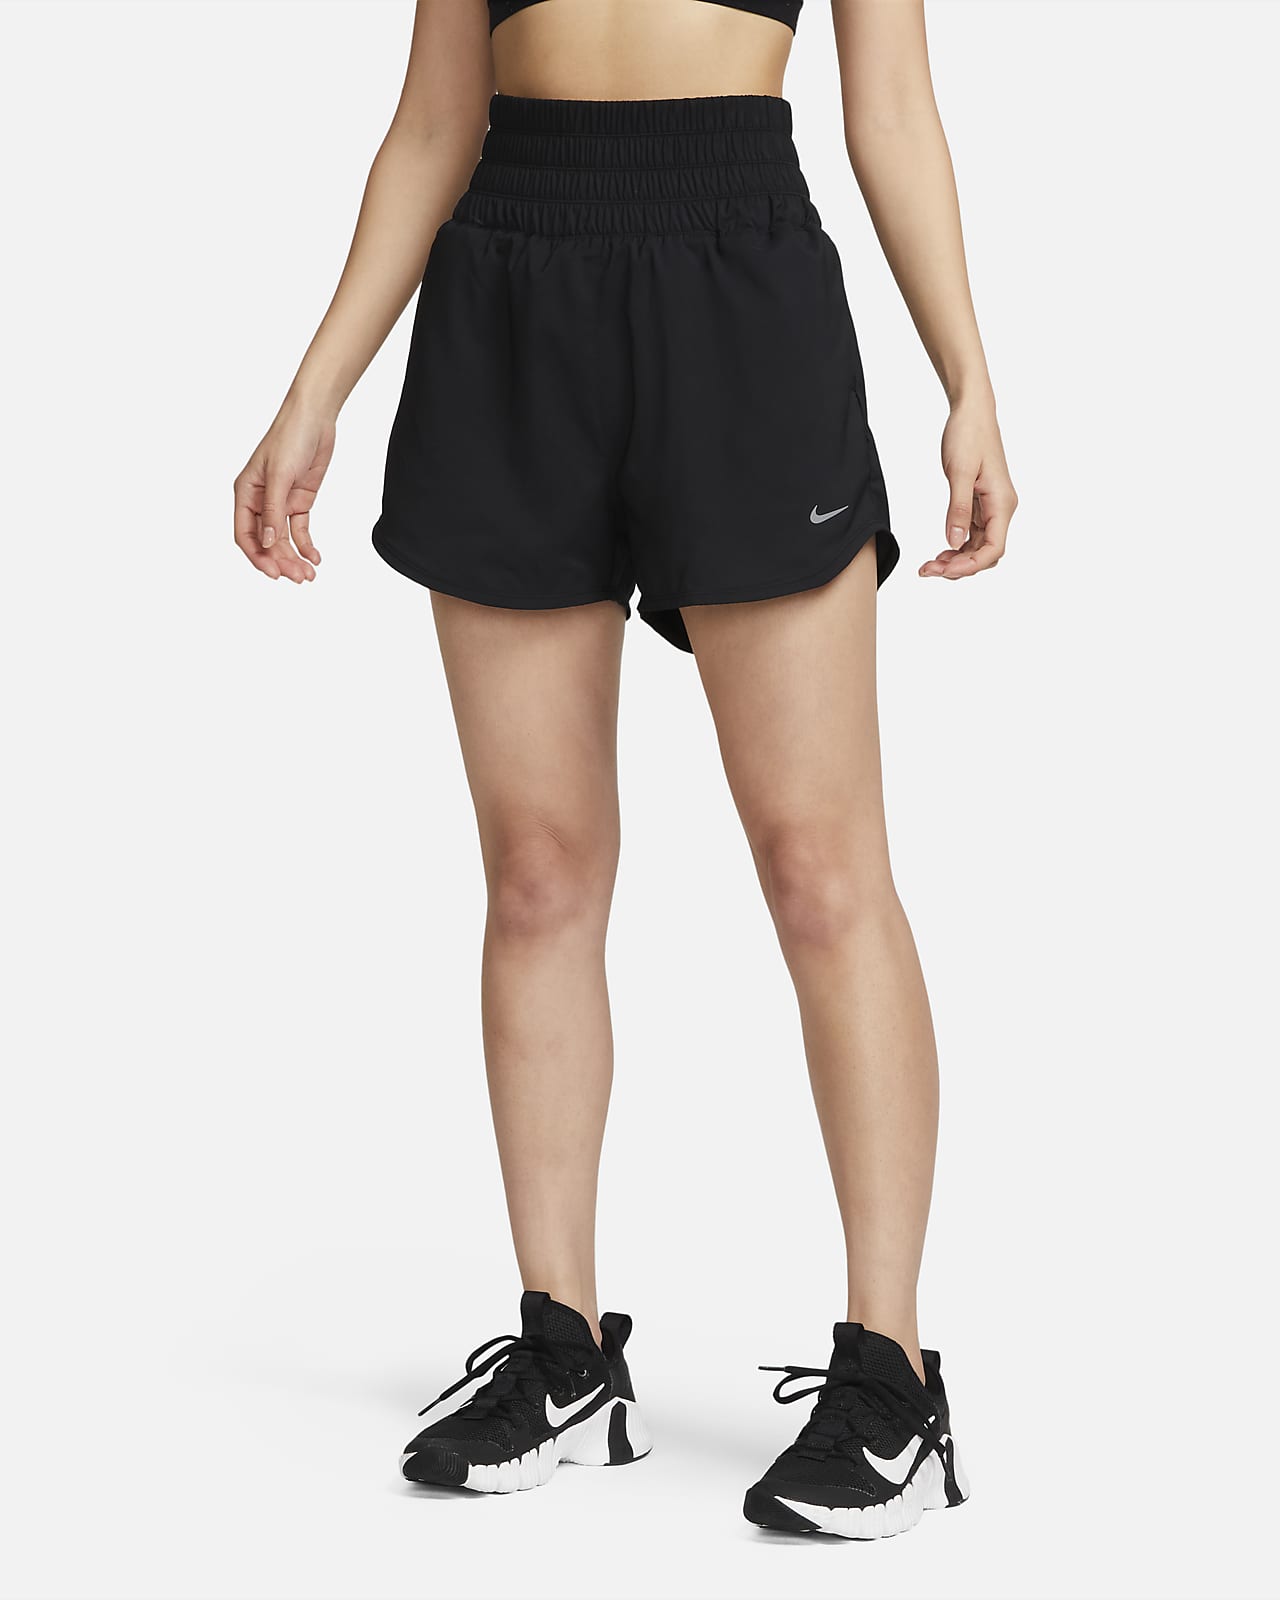 Nike Dri-FIT One Women's Ultra High-Waisted 8cm (approx.) Brief-Lined Shorts